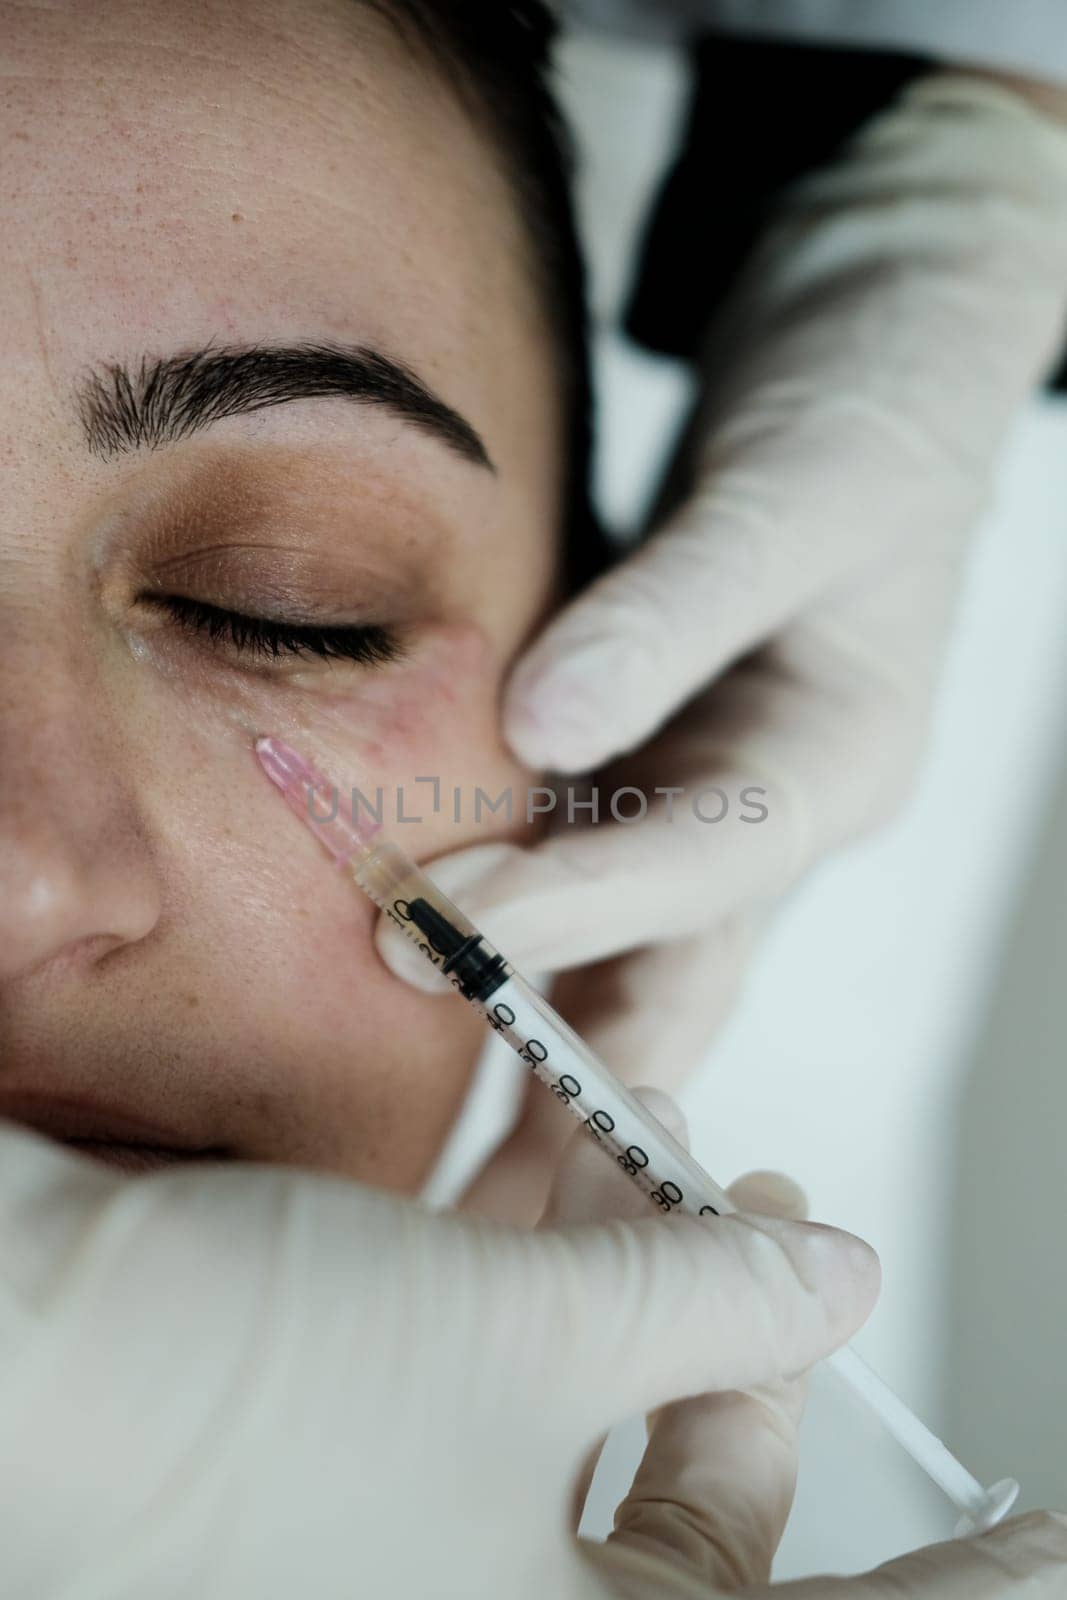 Cosmetologist applying eye mesotherapy to female patient. Eye mesotherapy procedure. Serum being applied in the undereye area via a syringe.